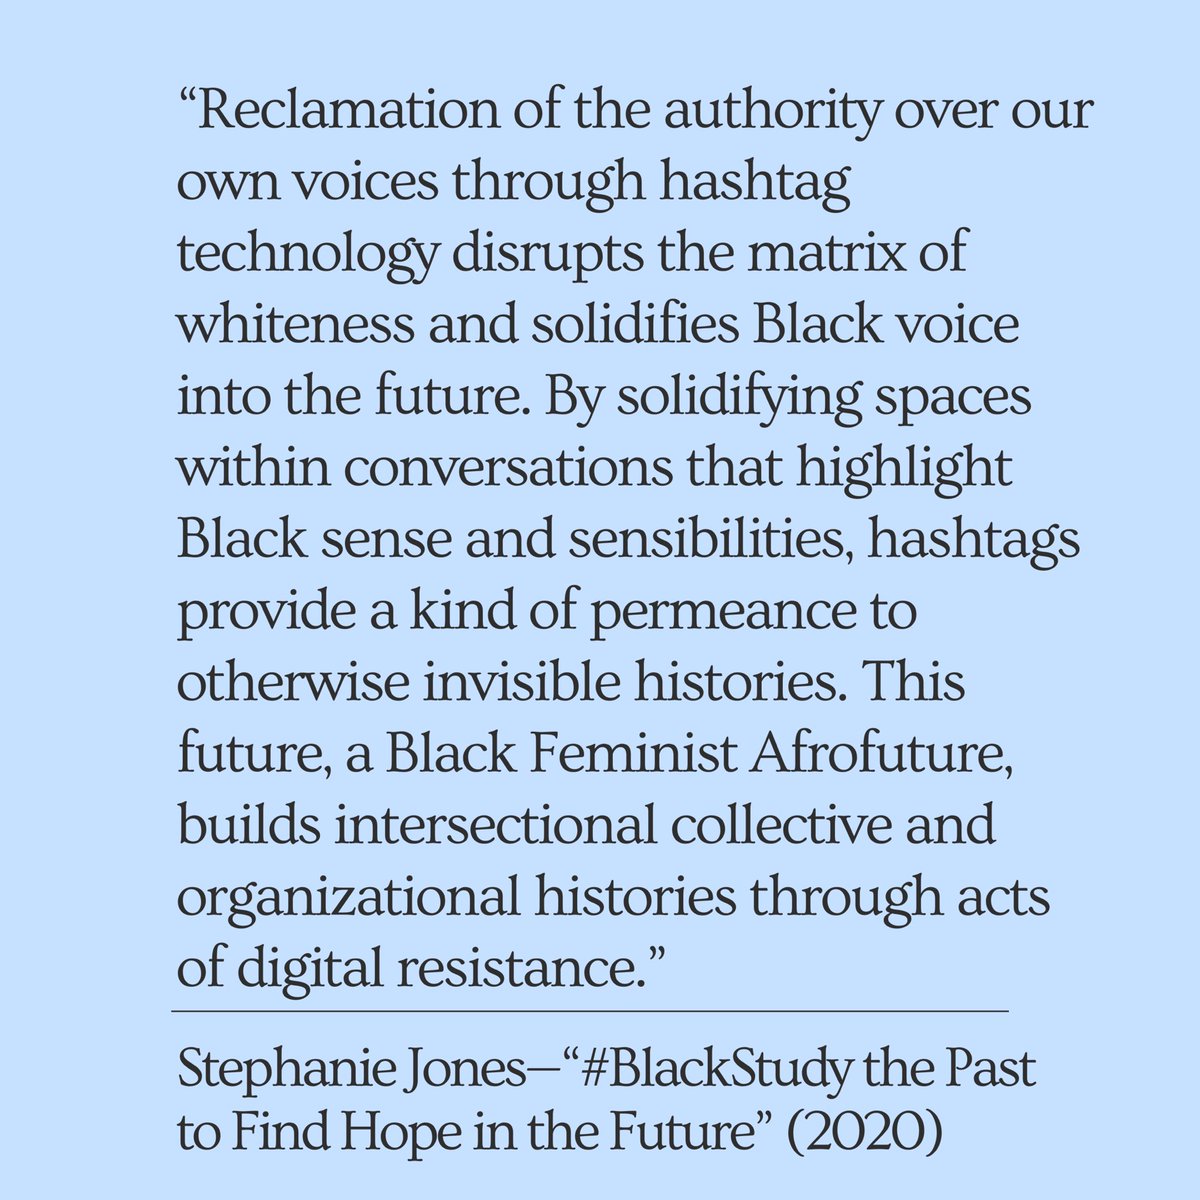 This #TBT, we preview Stephanie Jones’s “#BlackStudy the Past to Find Hope in the Future,” which will be featured in the upcoming second volume of SPARK: A 4C4Equality Journal!
.
#activism #sparkactivism #4c4equality #academia #blackfeminism #intersectionality #technology